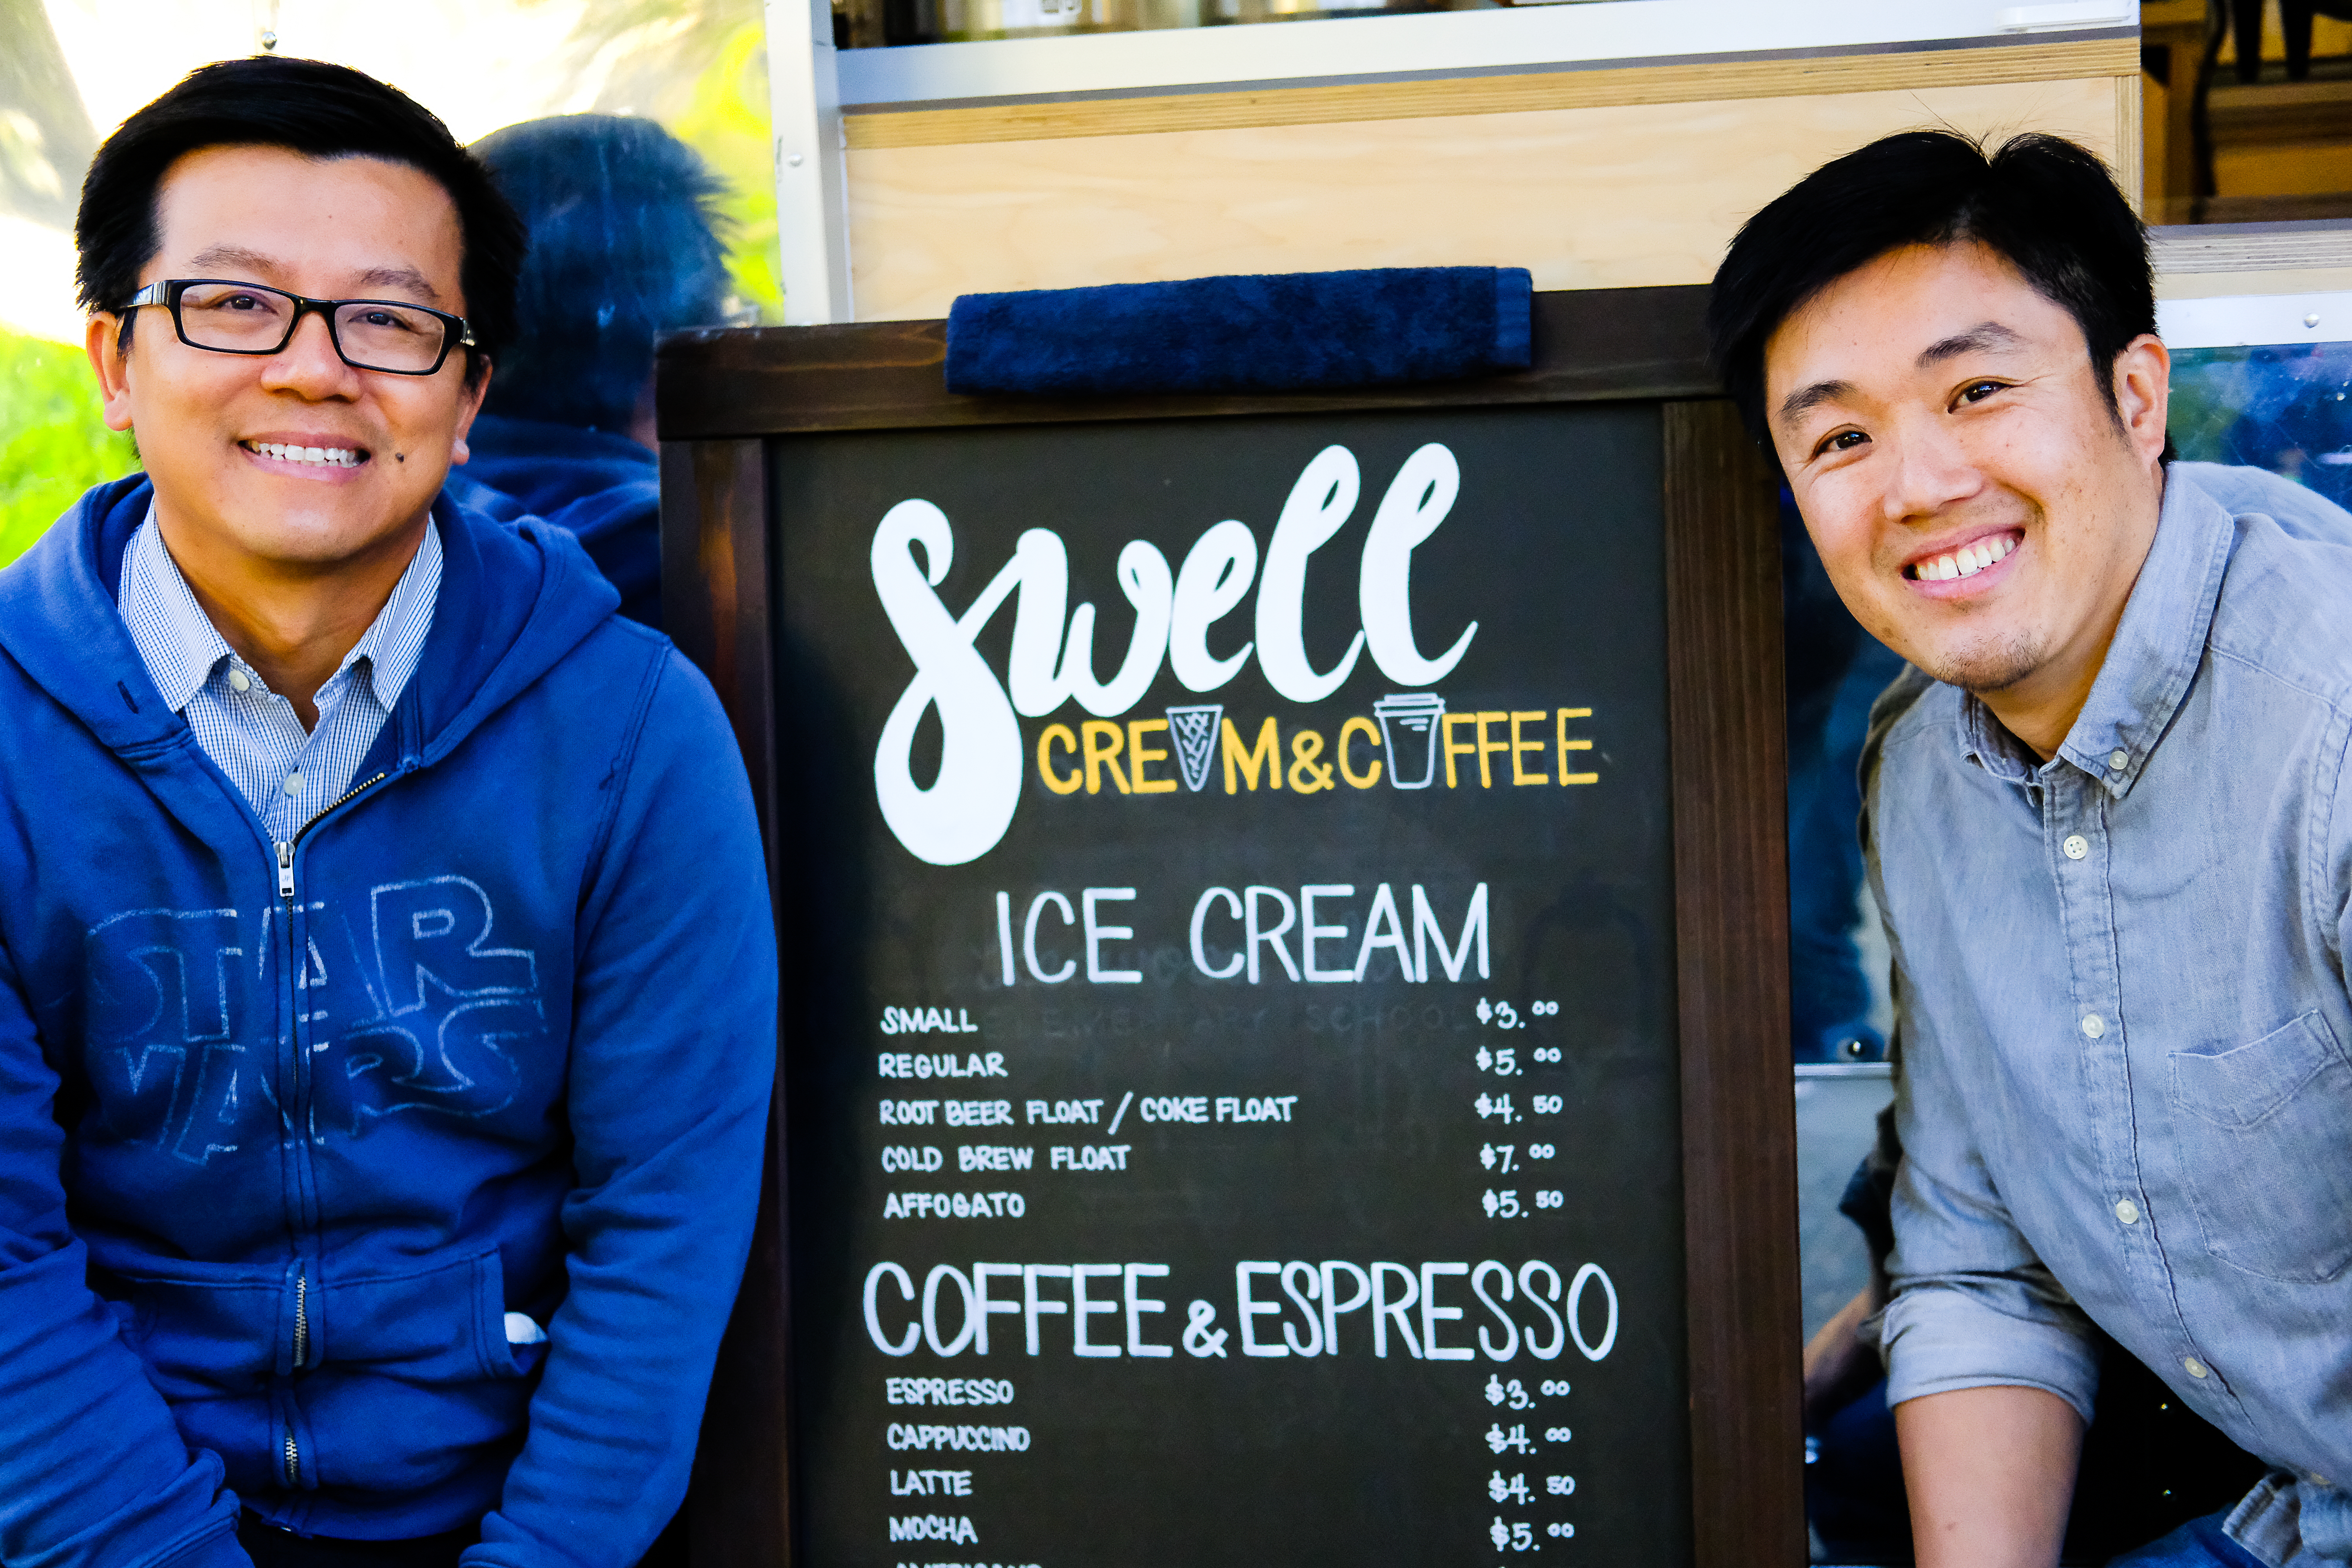 Owners and business partners Ta Ratana (left) and Benson Chiu (right) with menu in front of Swell Cream & Coffee. Picture by Otto Pippenger, April 17, 2017. 